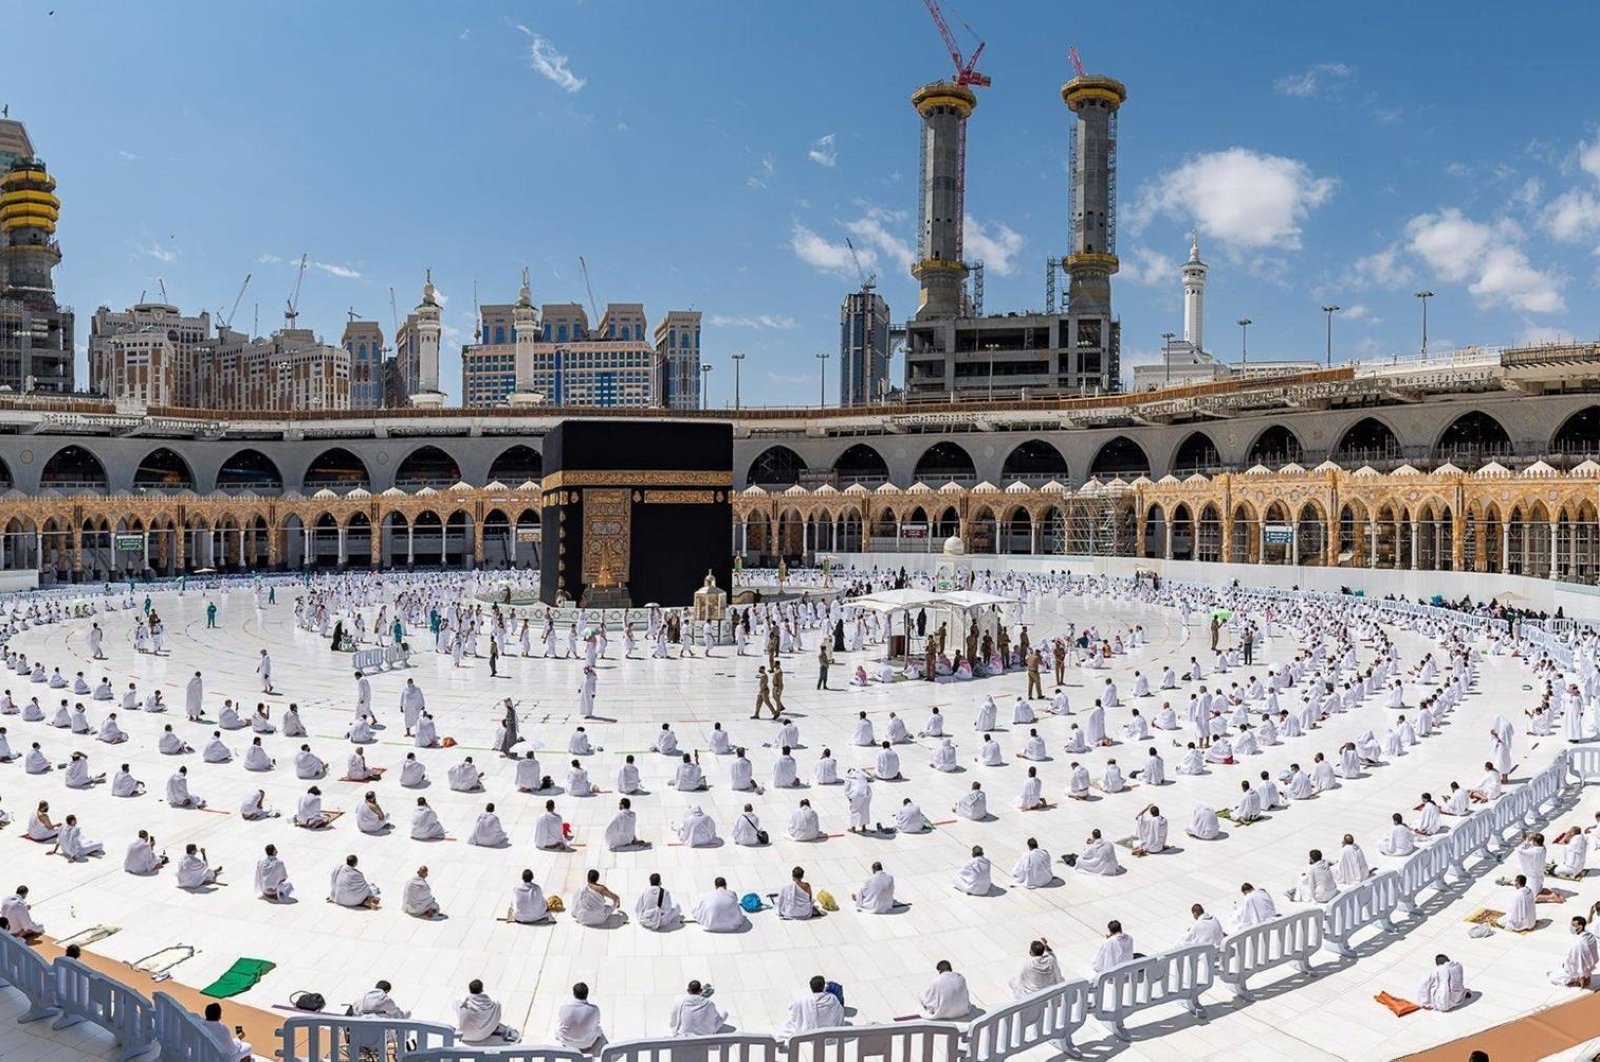 Muslims perform socially distanced Friday prayers as they arrive to perform Umrah in the Grand Mosque in the holy city of Mecca, Saudi Arabia, Feb. 26, 2021. (Saudi Press Agency via Reuters)